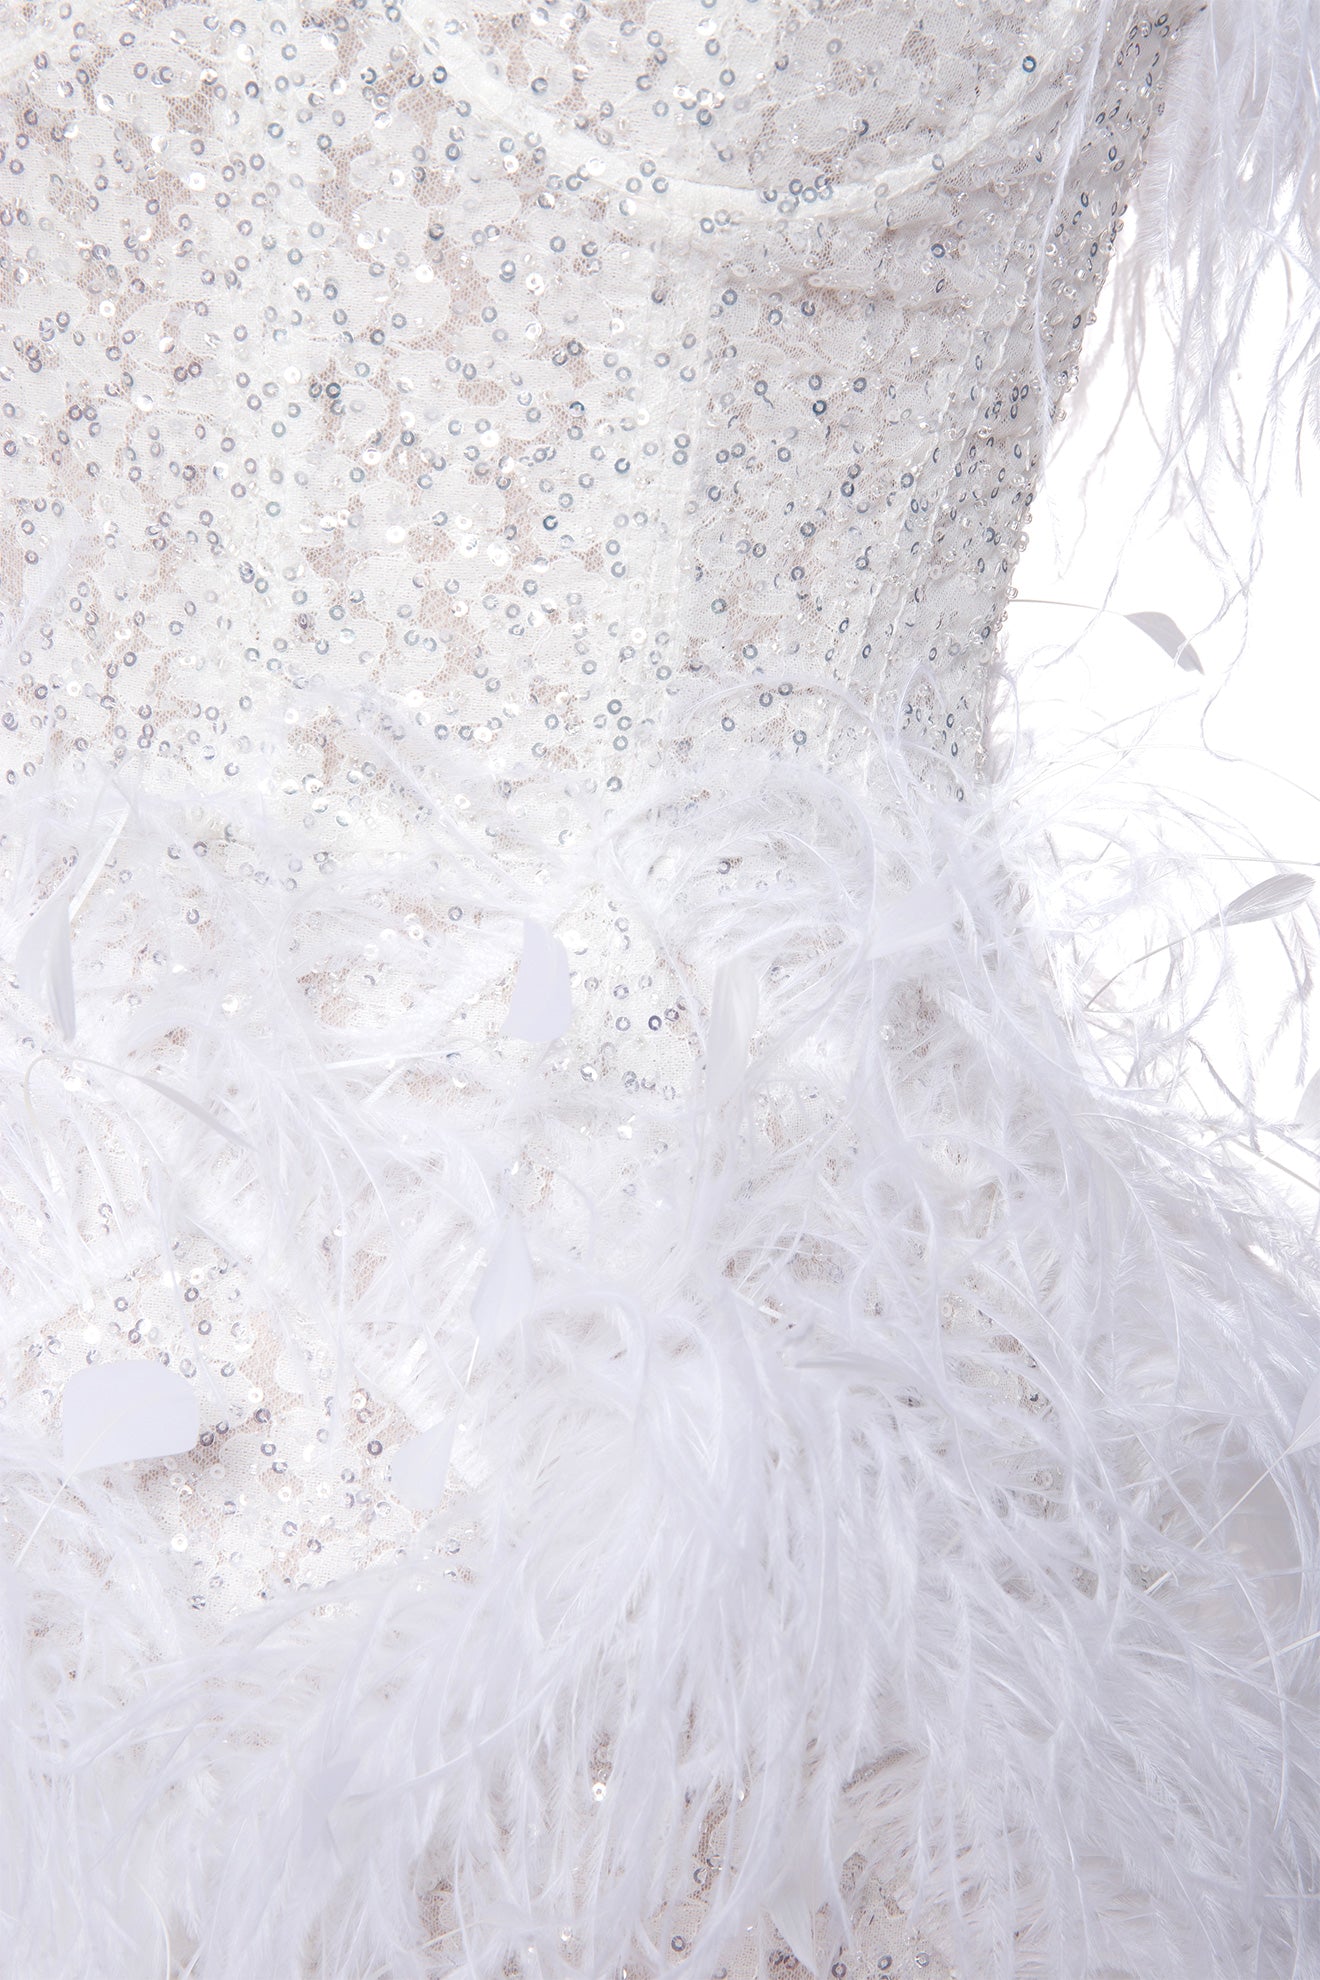 Magnifying T-length wedding dress with feathers and lace embellishments